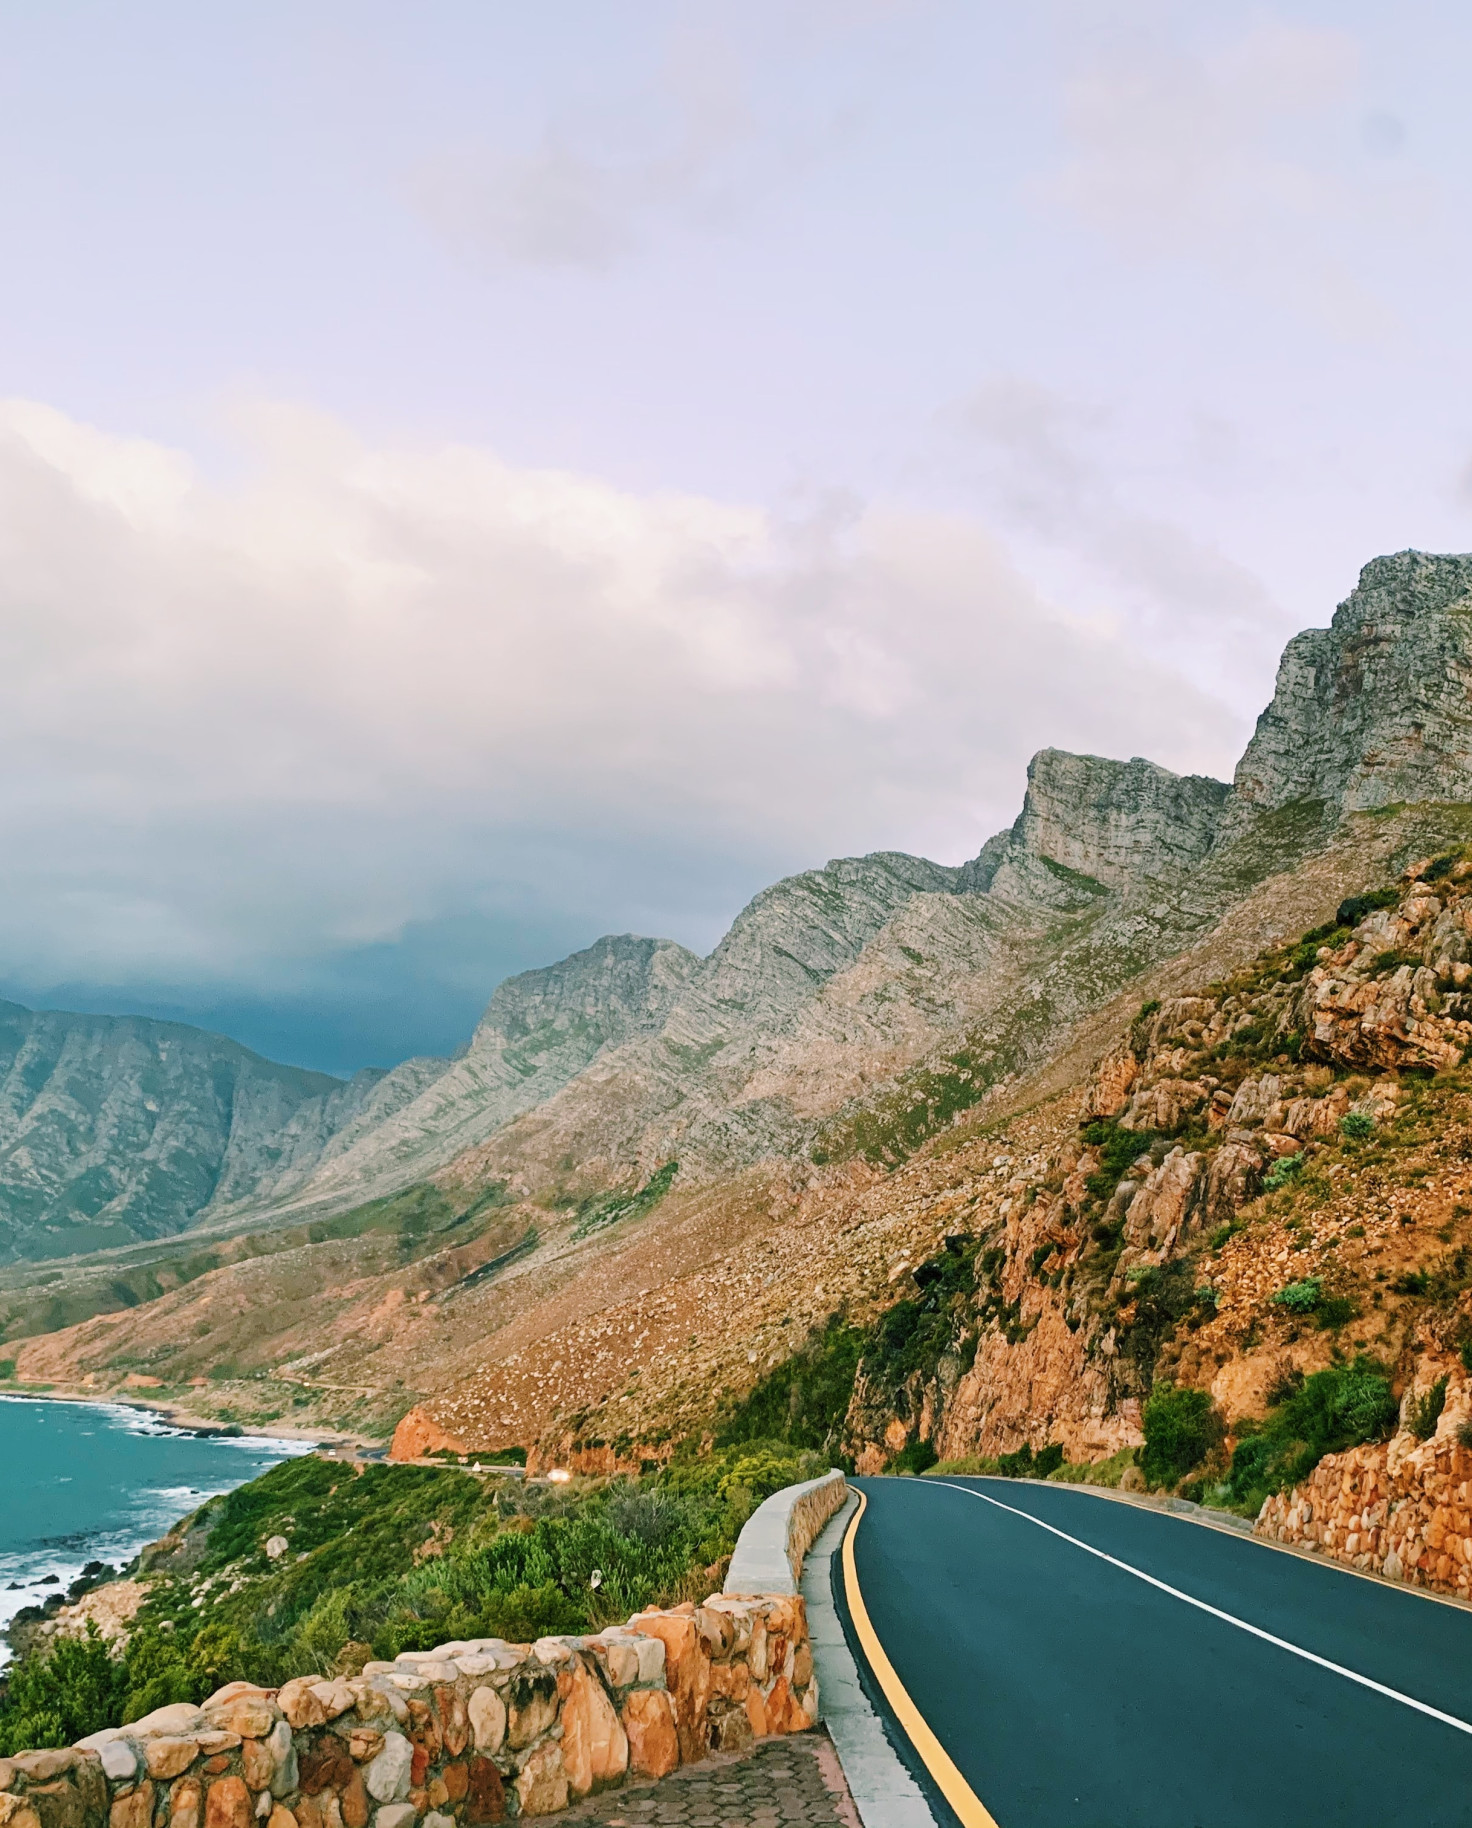 Road running alongside the blue ocean and mountains in South Africa